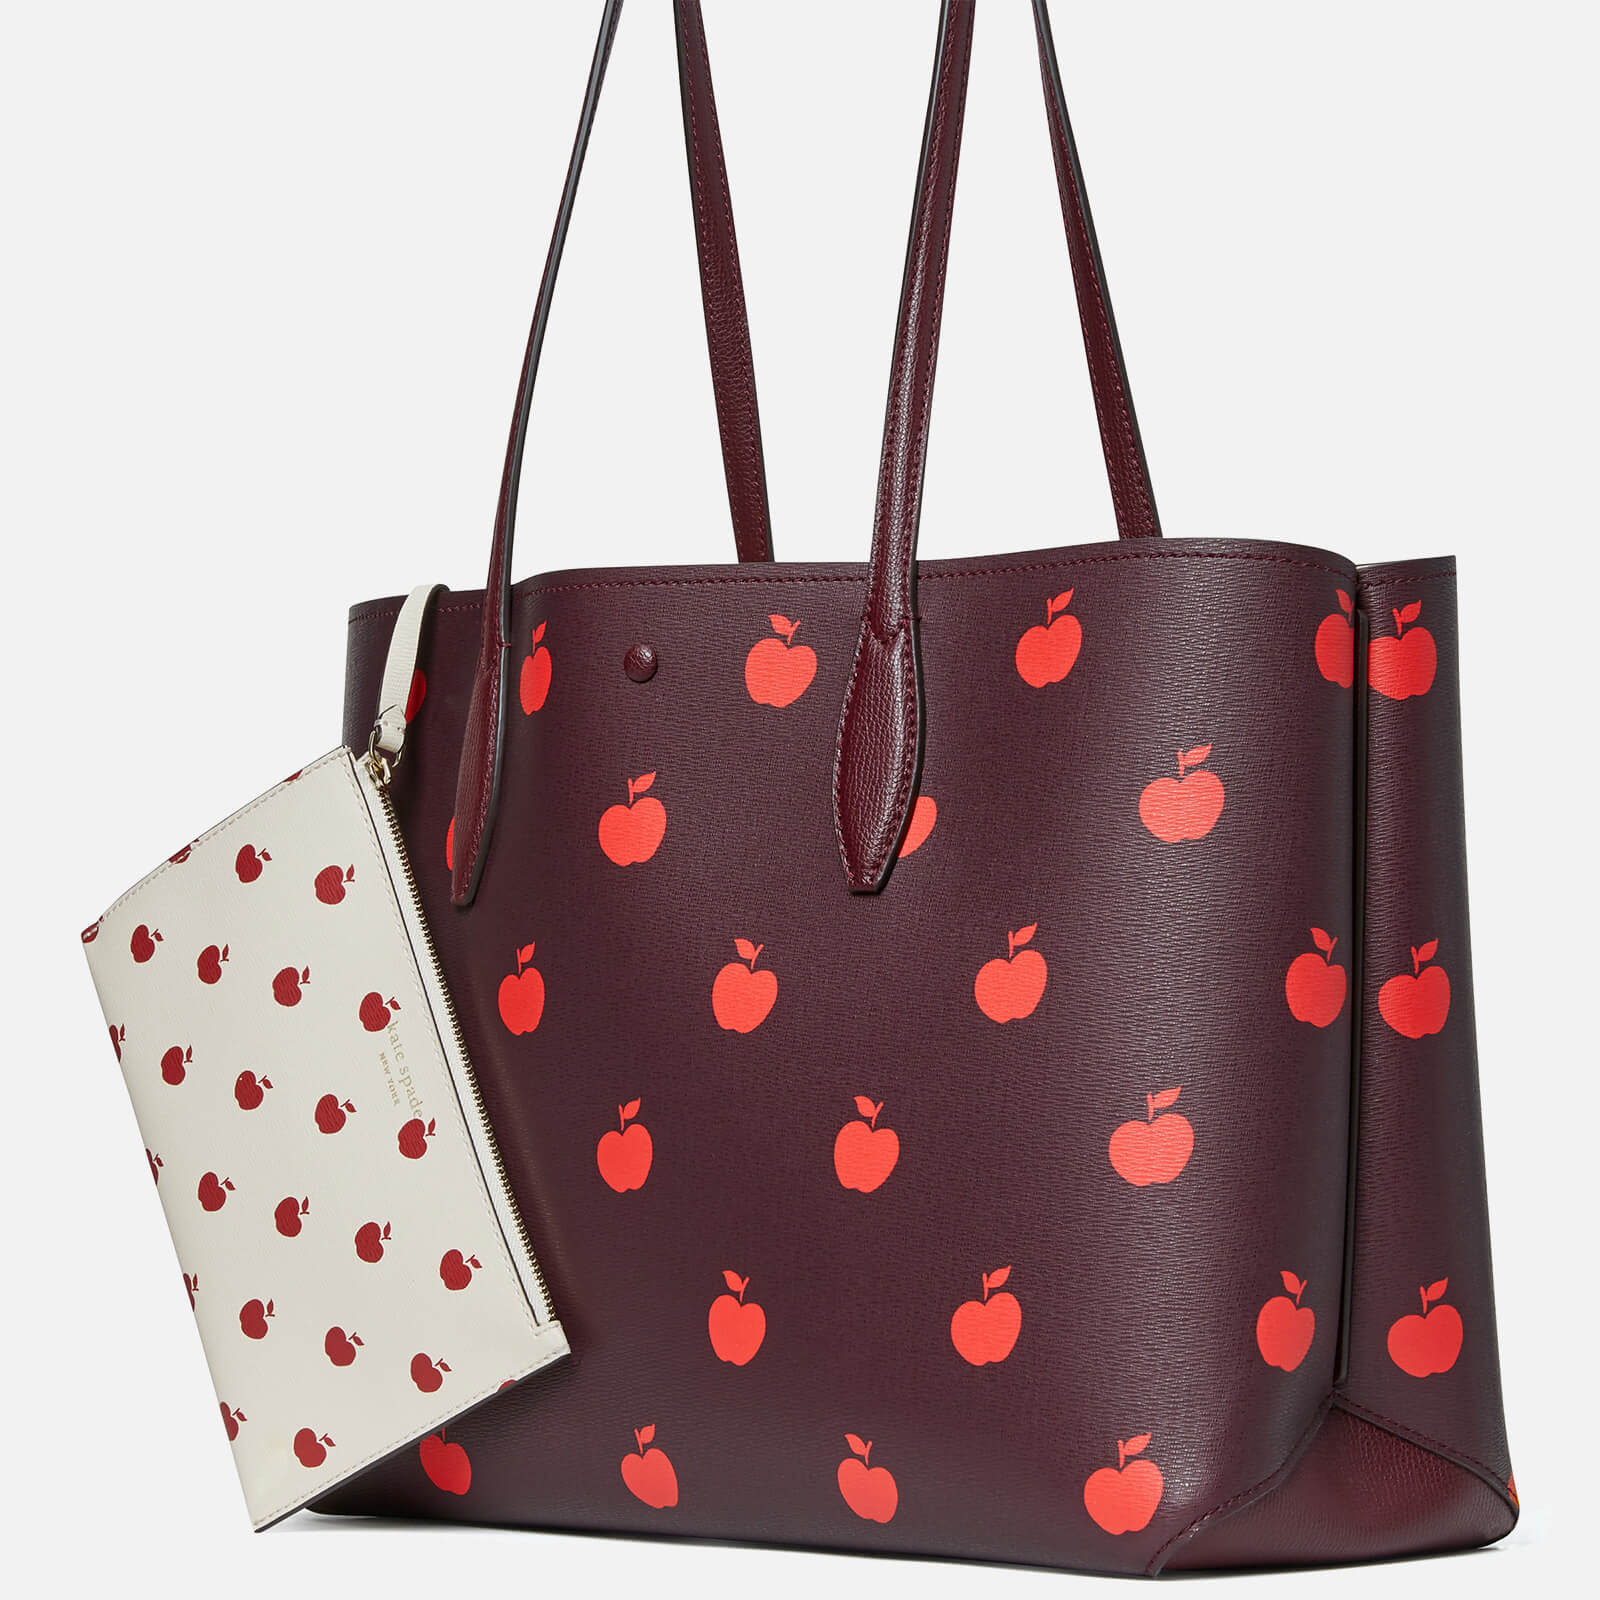 Kate Spade New York Women's All Day Apple Toss – Tote Bag - Multi K4367 Womens Accessories, Burgundy